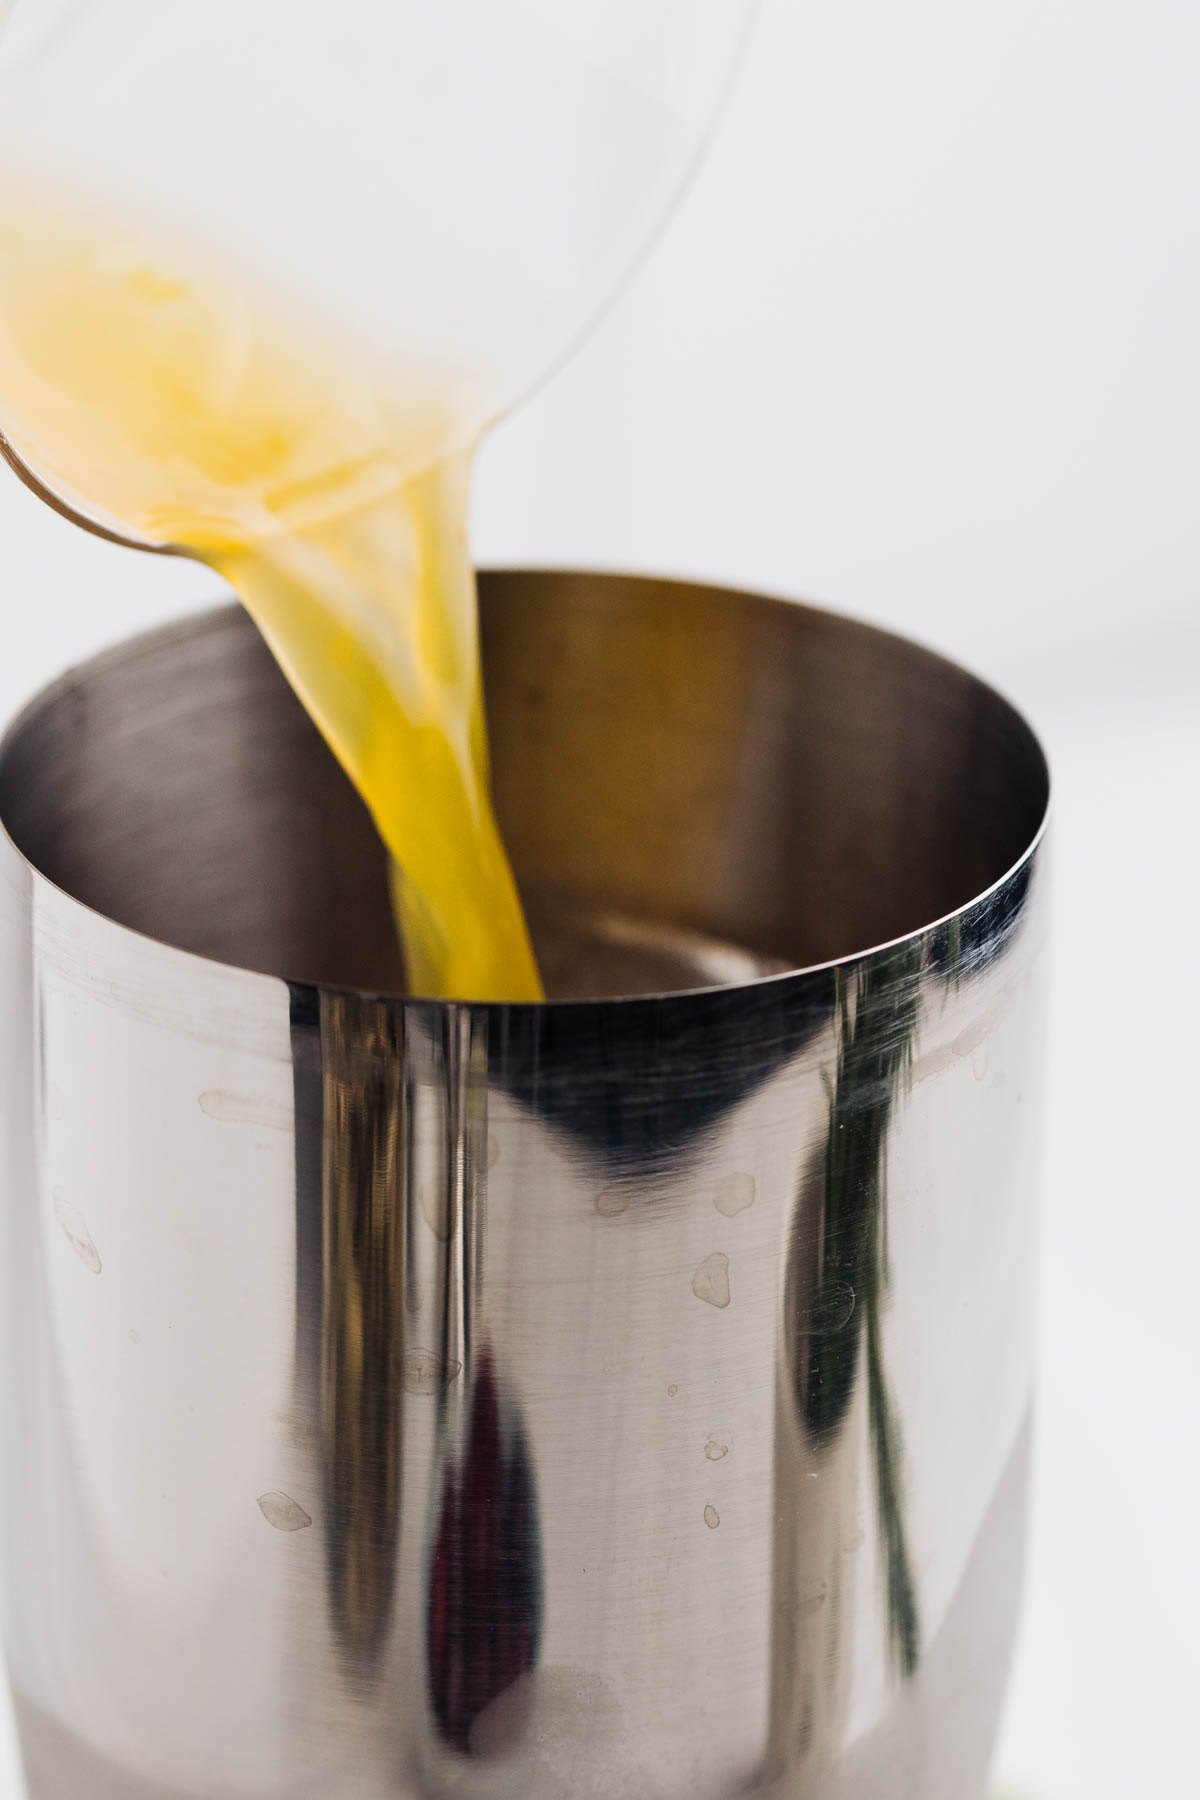 A silver colored cocktail shaker with a yellow liquid being poured in.